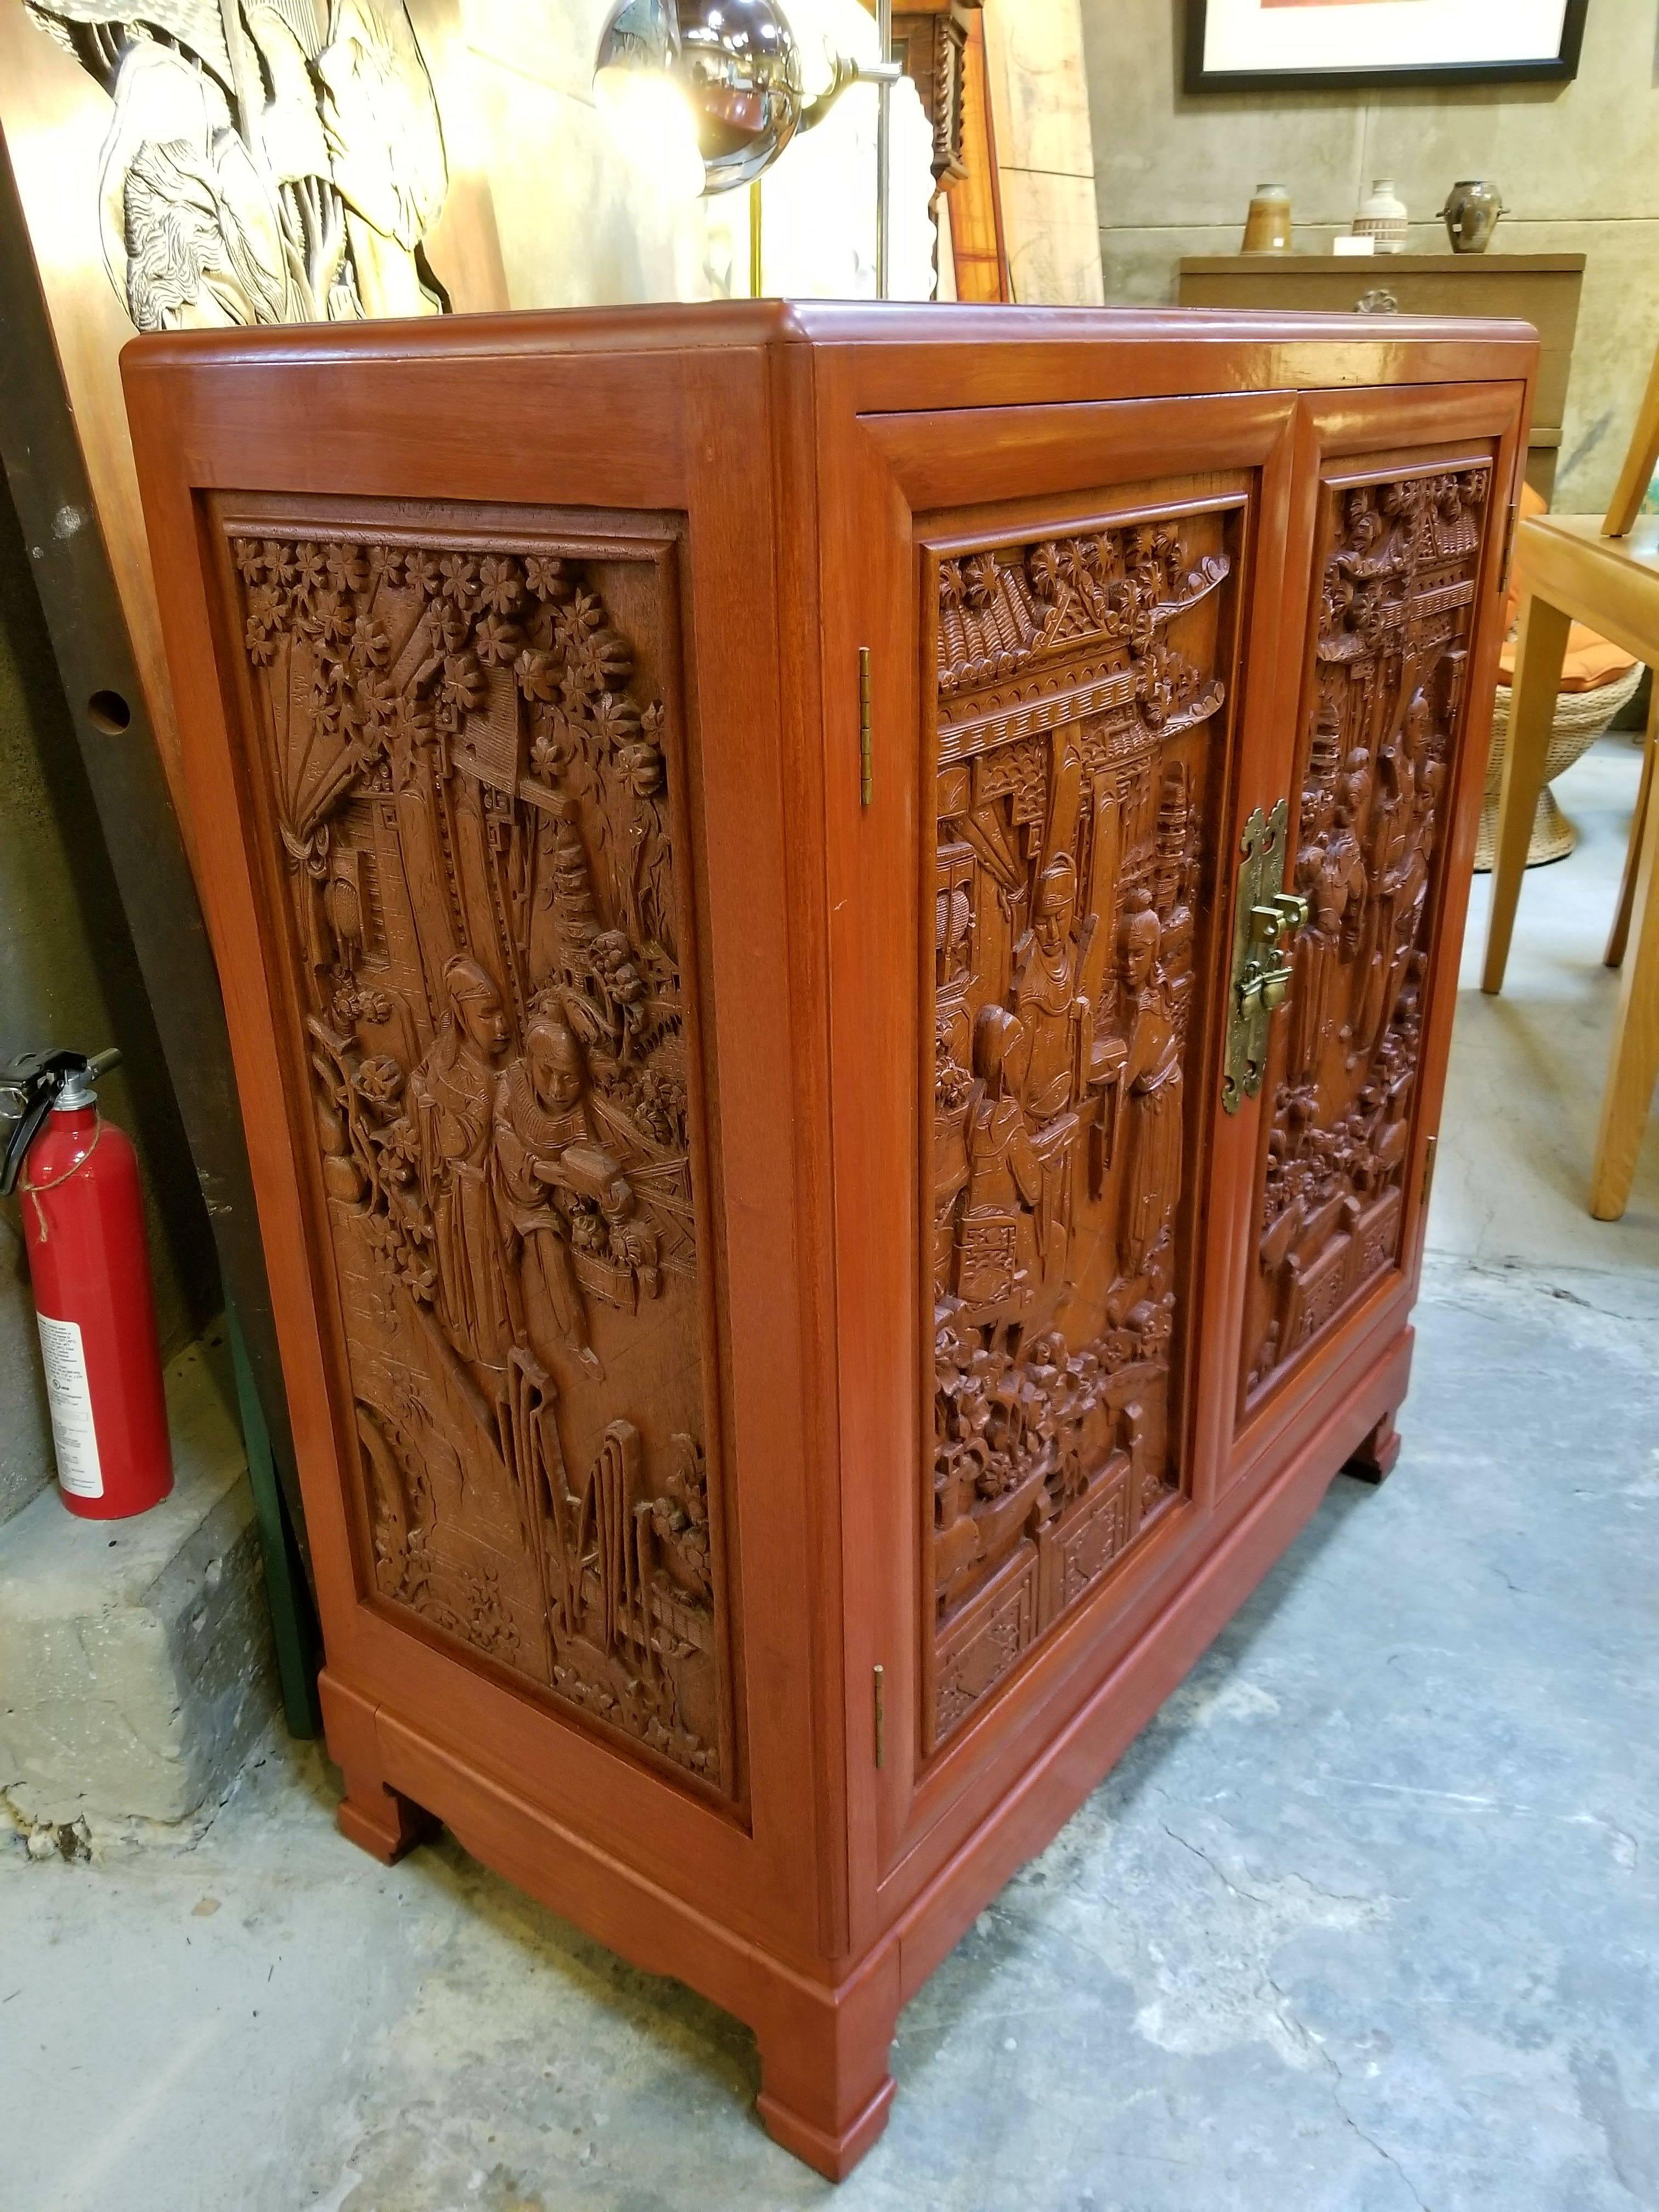 Carved hardwood fitted cabinet or dresser by George Zee Furniture Company, circa 1960s. Deep relief hand carving on three sides. Interior consists of 6 drawers. Excellent original condition and finish.